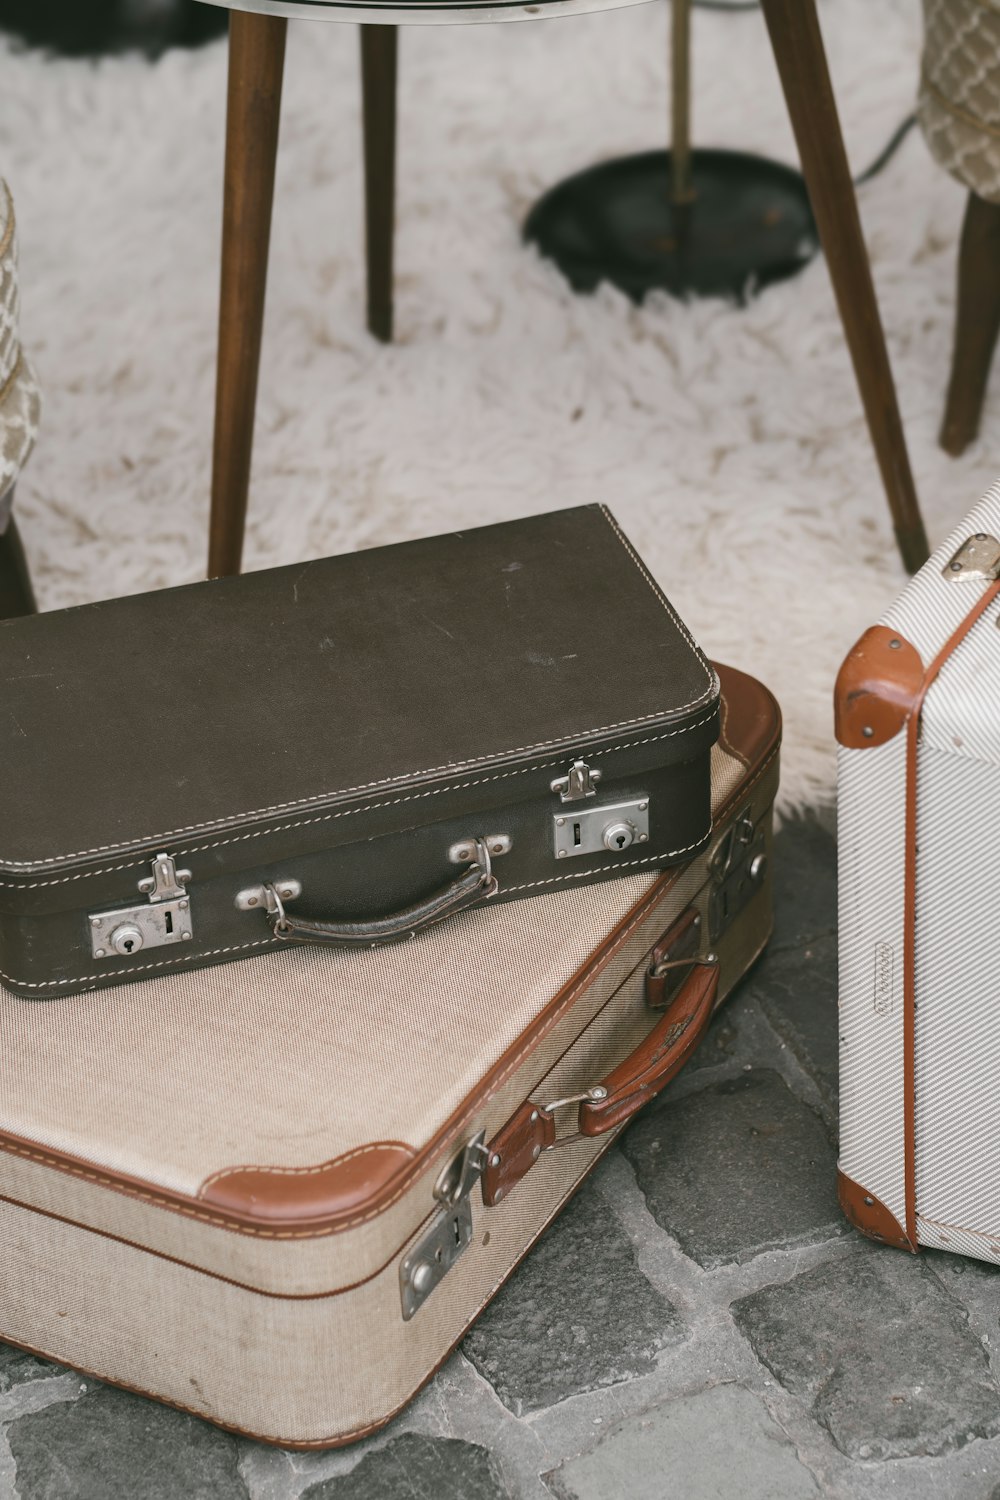 a couple of suitcases sitting on top of a stone floor